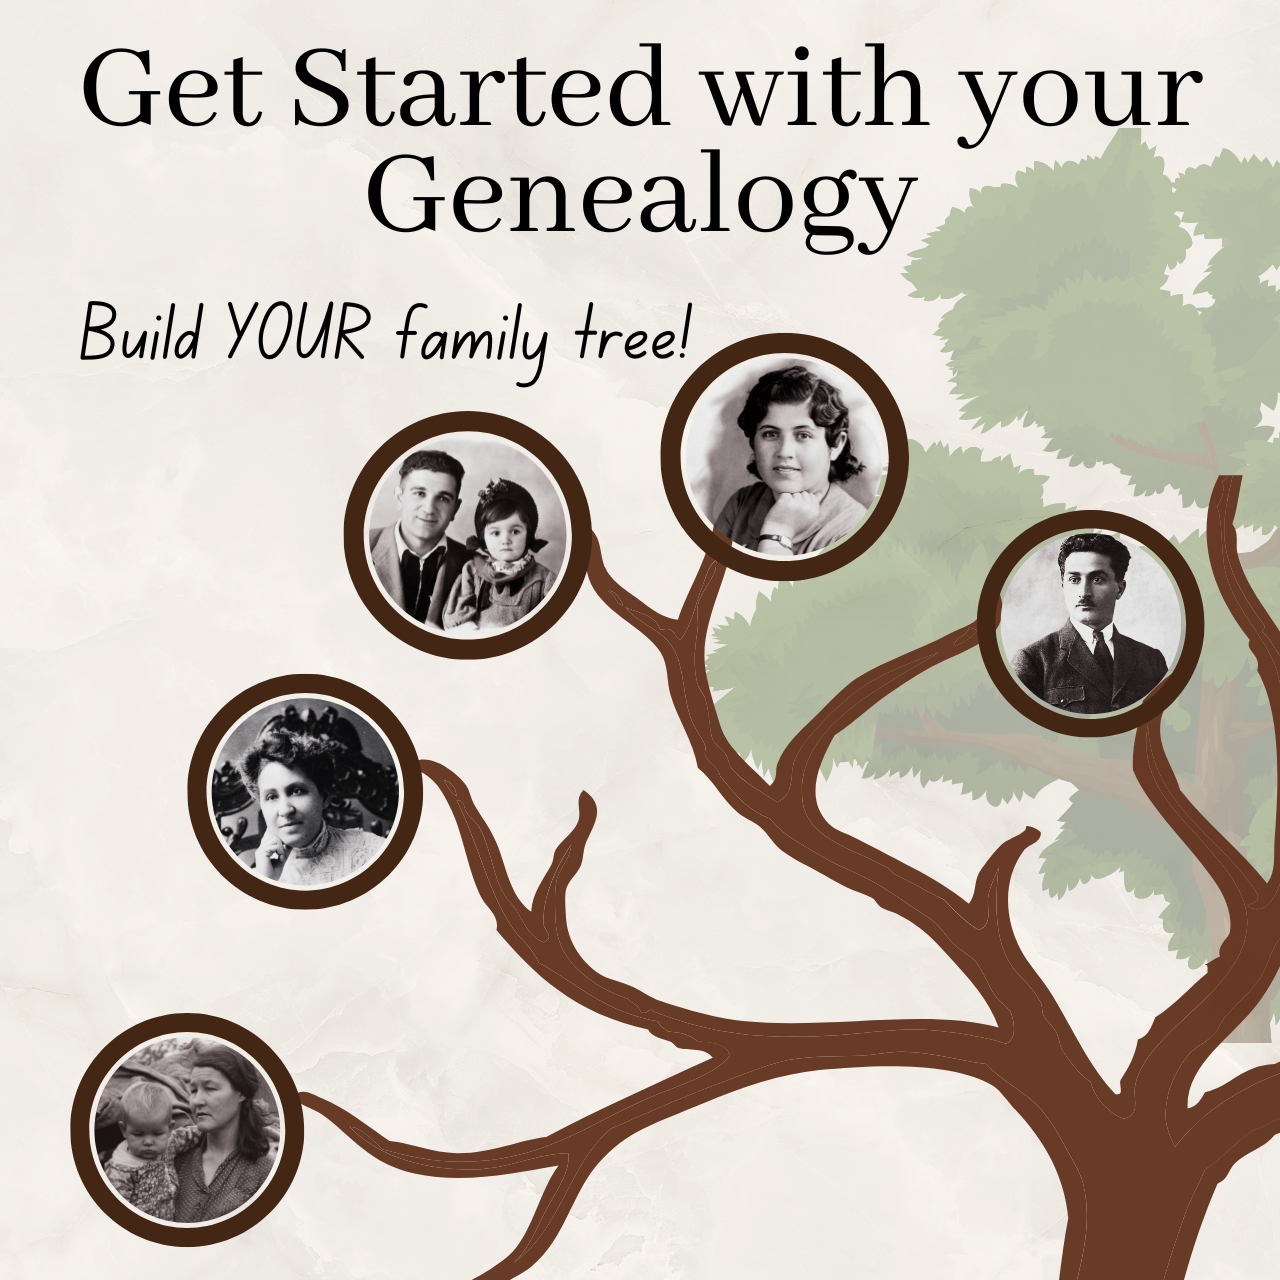 Get Started with your genealogy - family tree with old family pictures